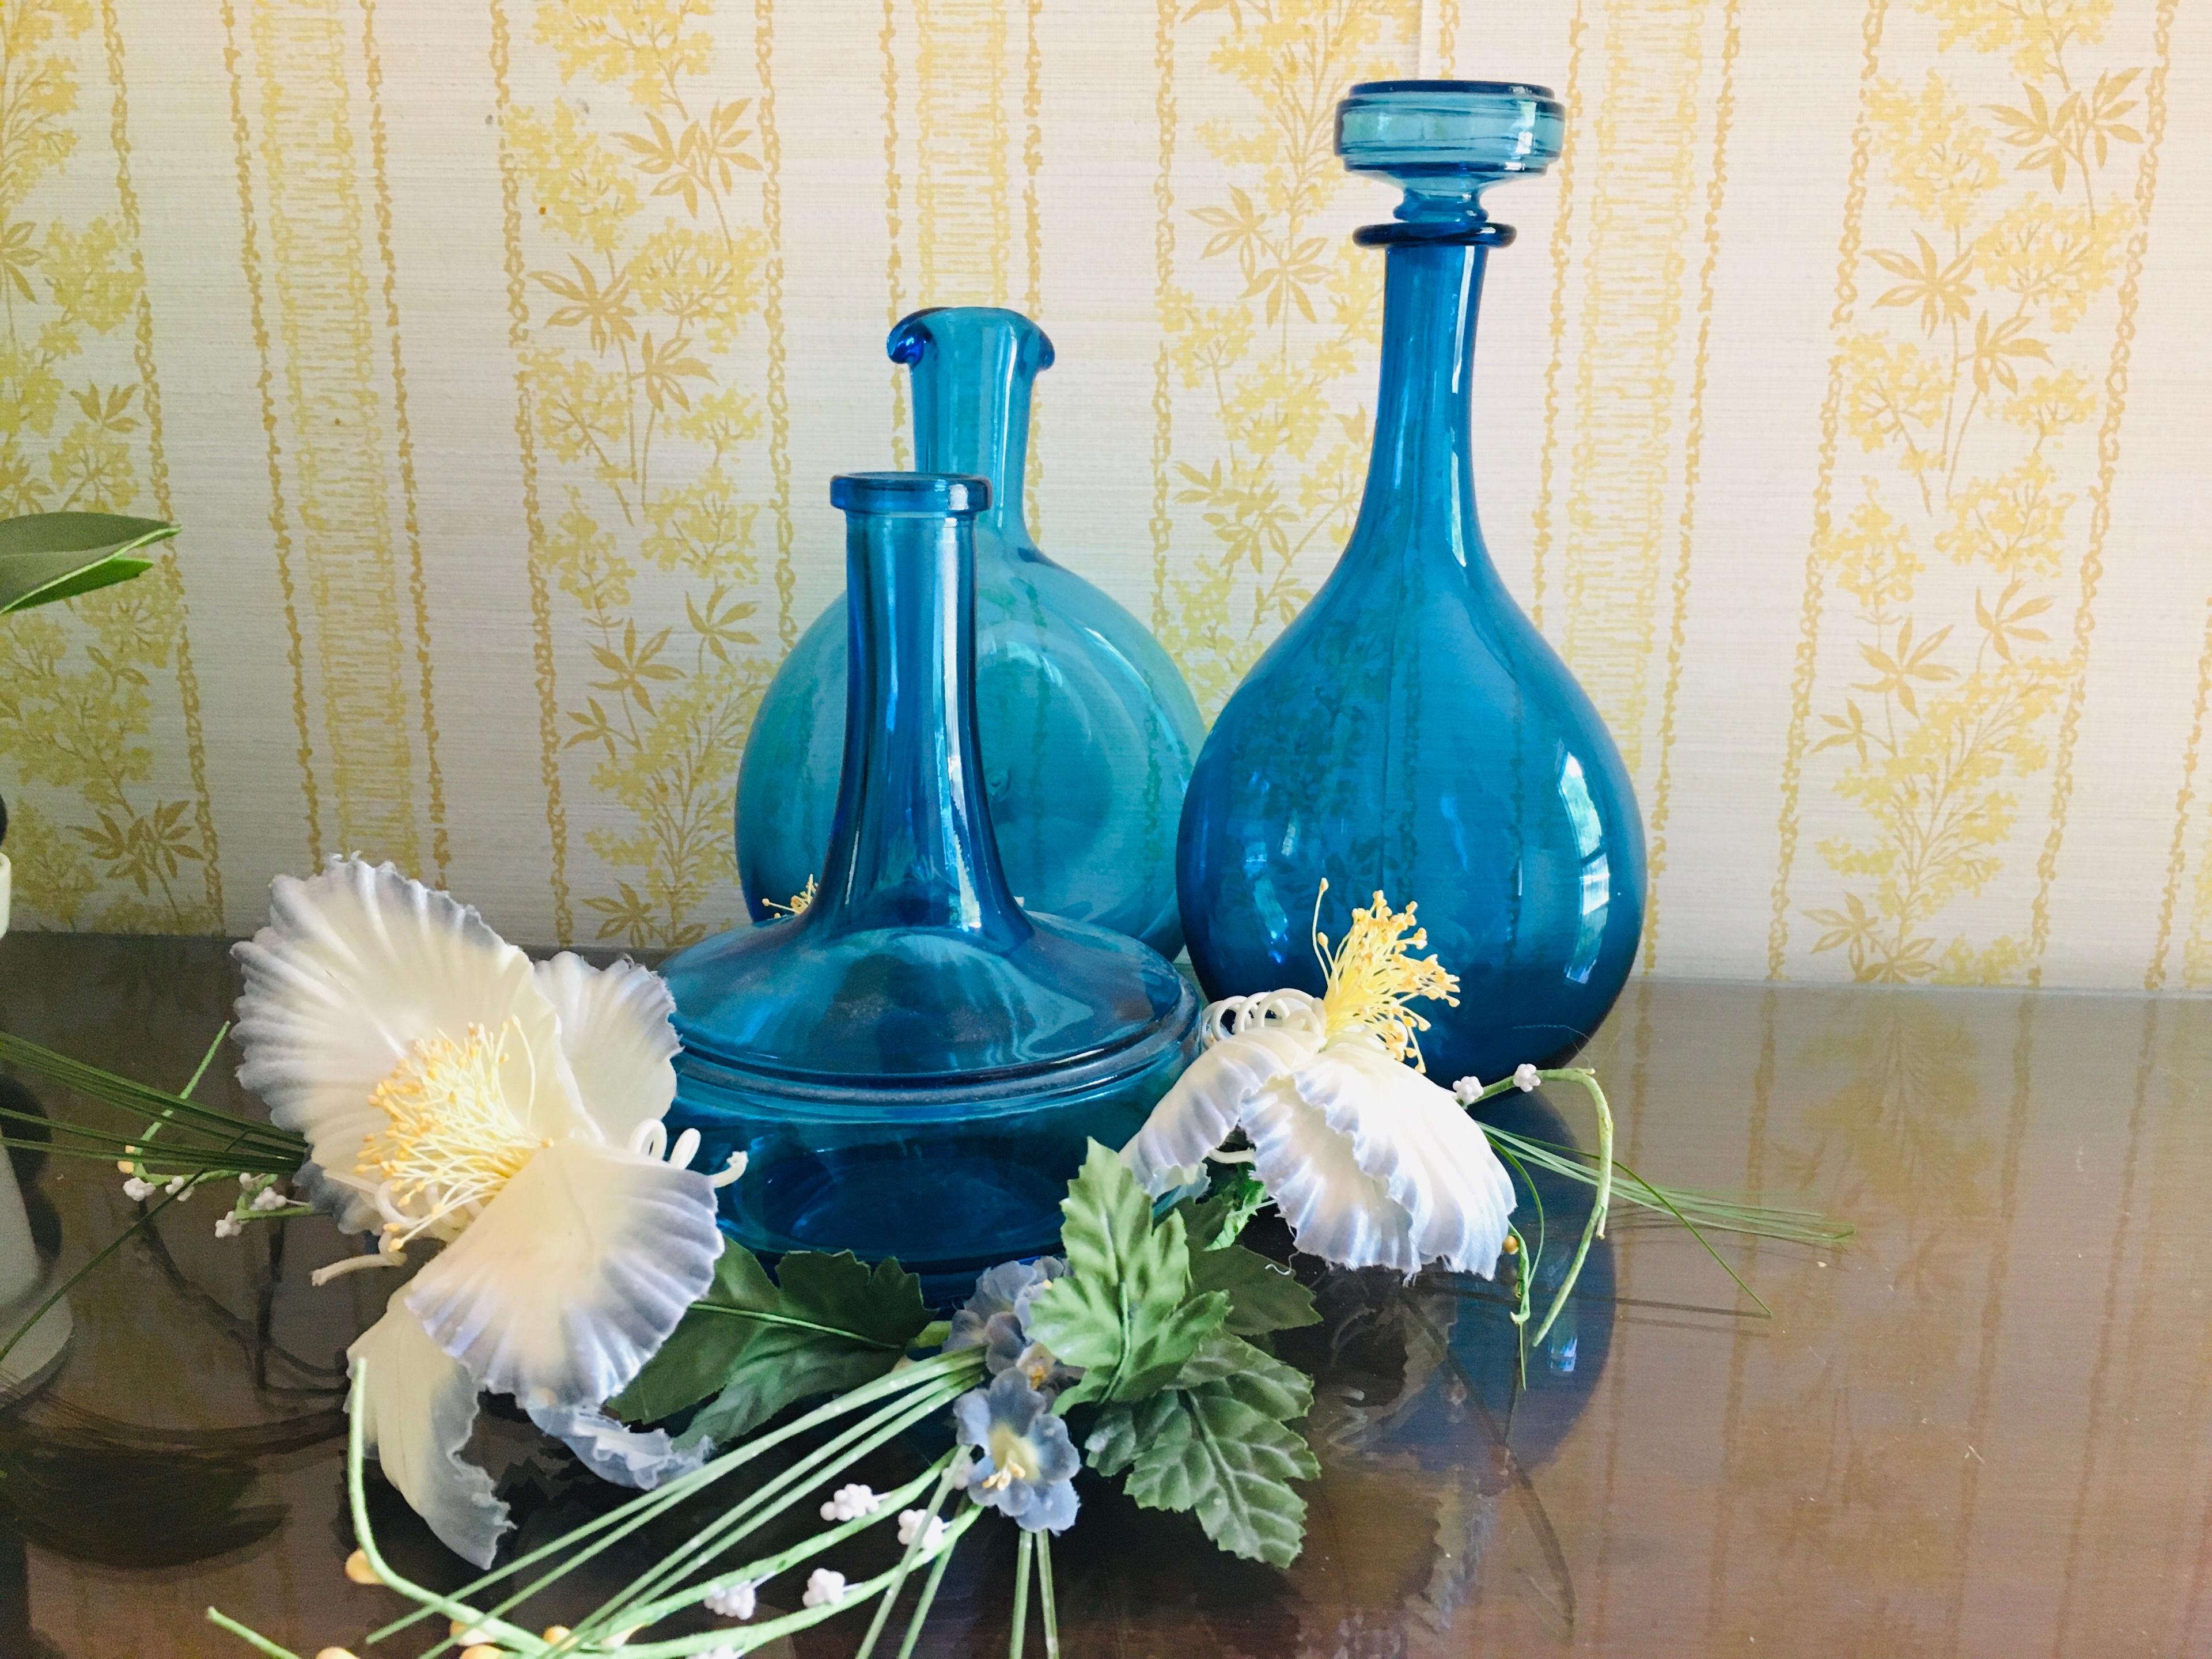 Collection of Blue Glass Vases. No marked names